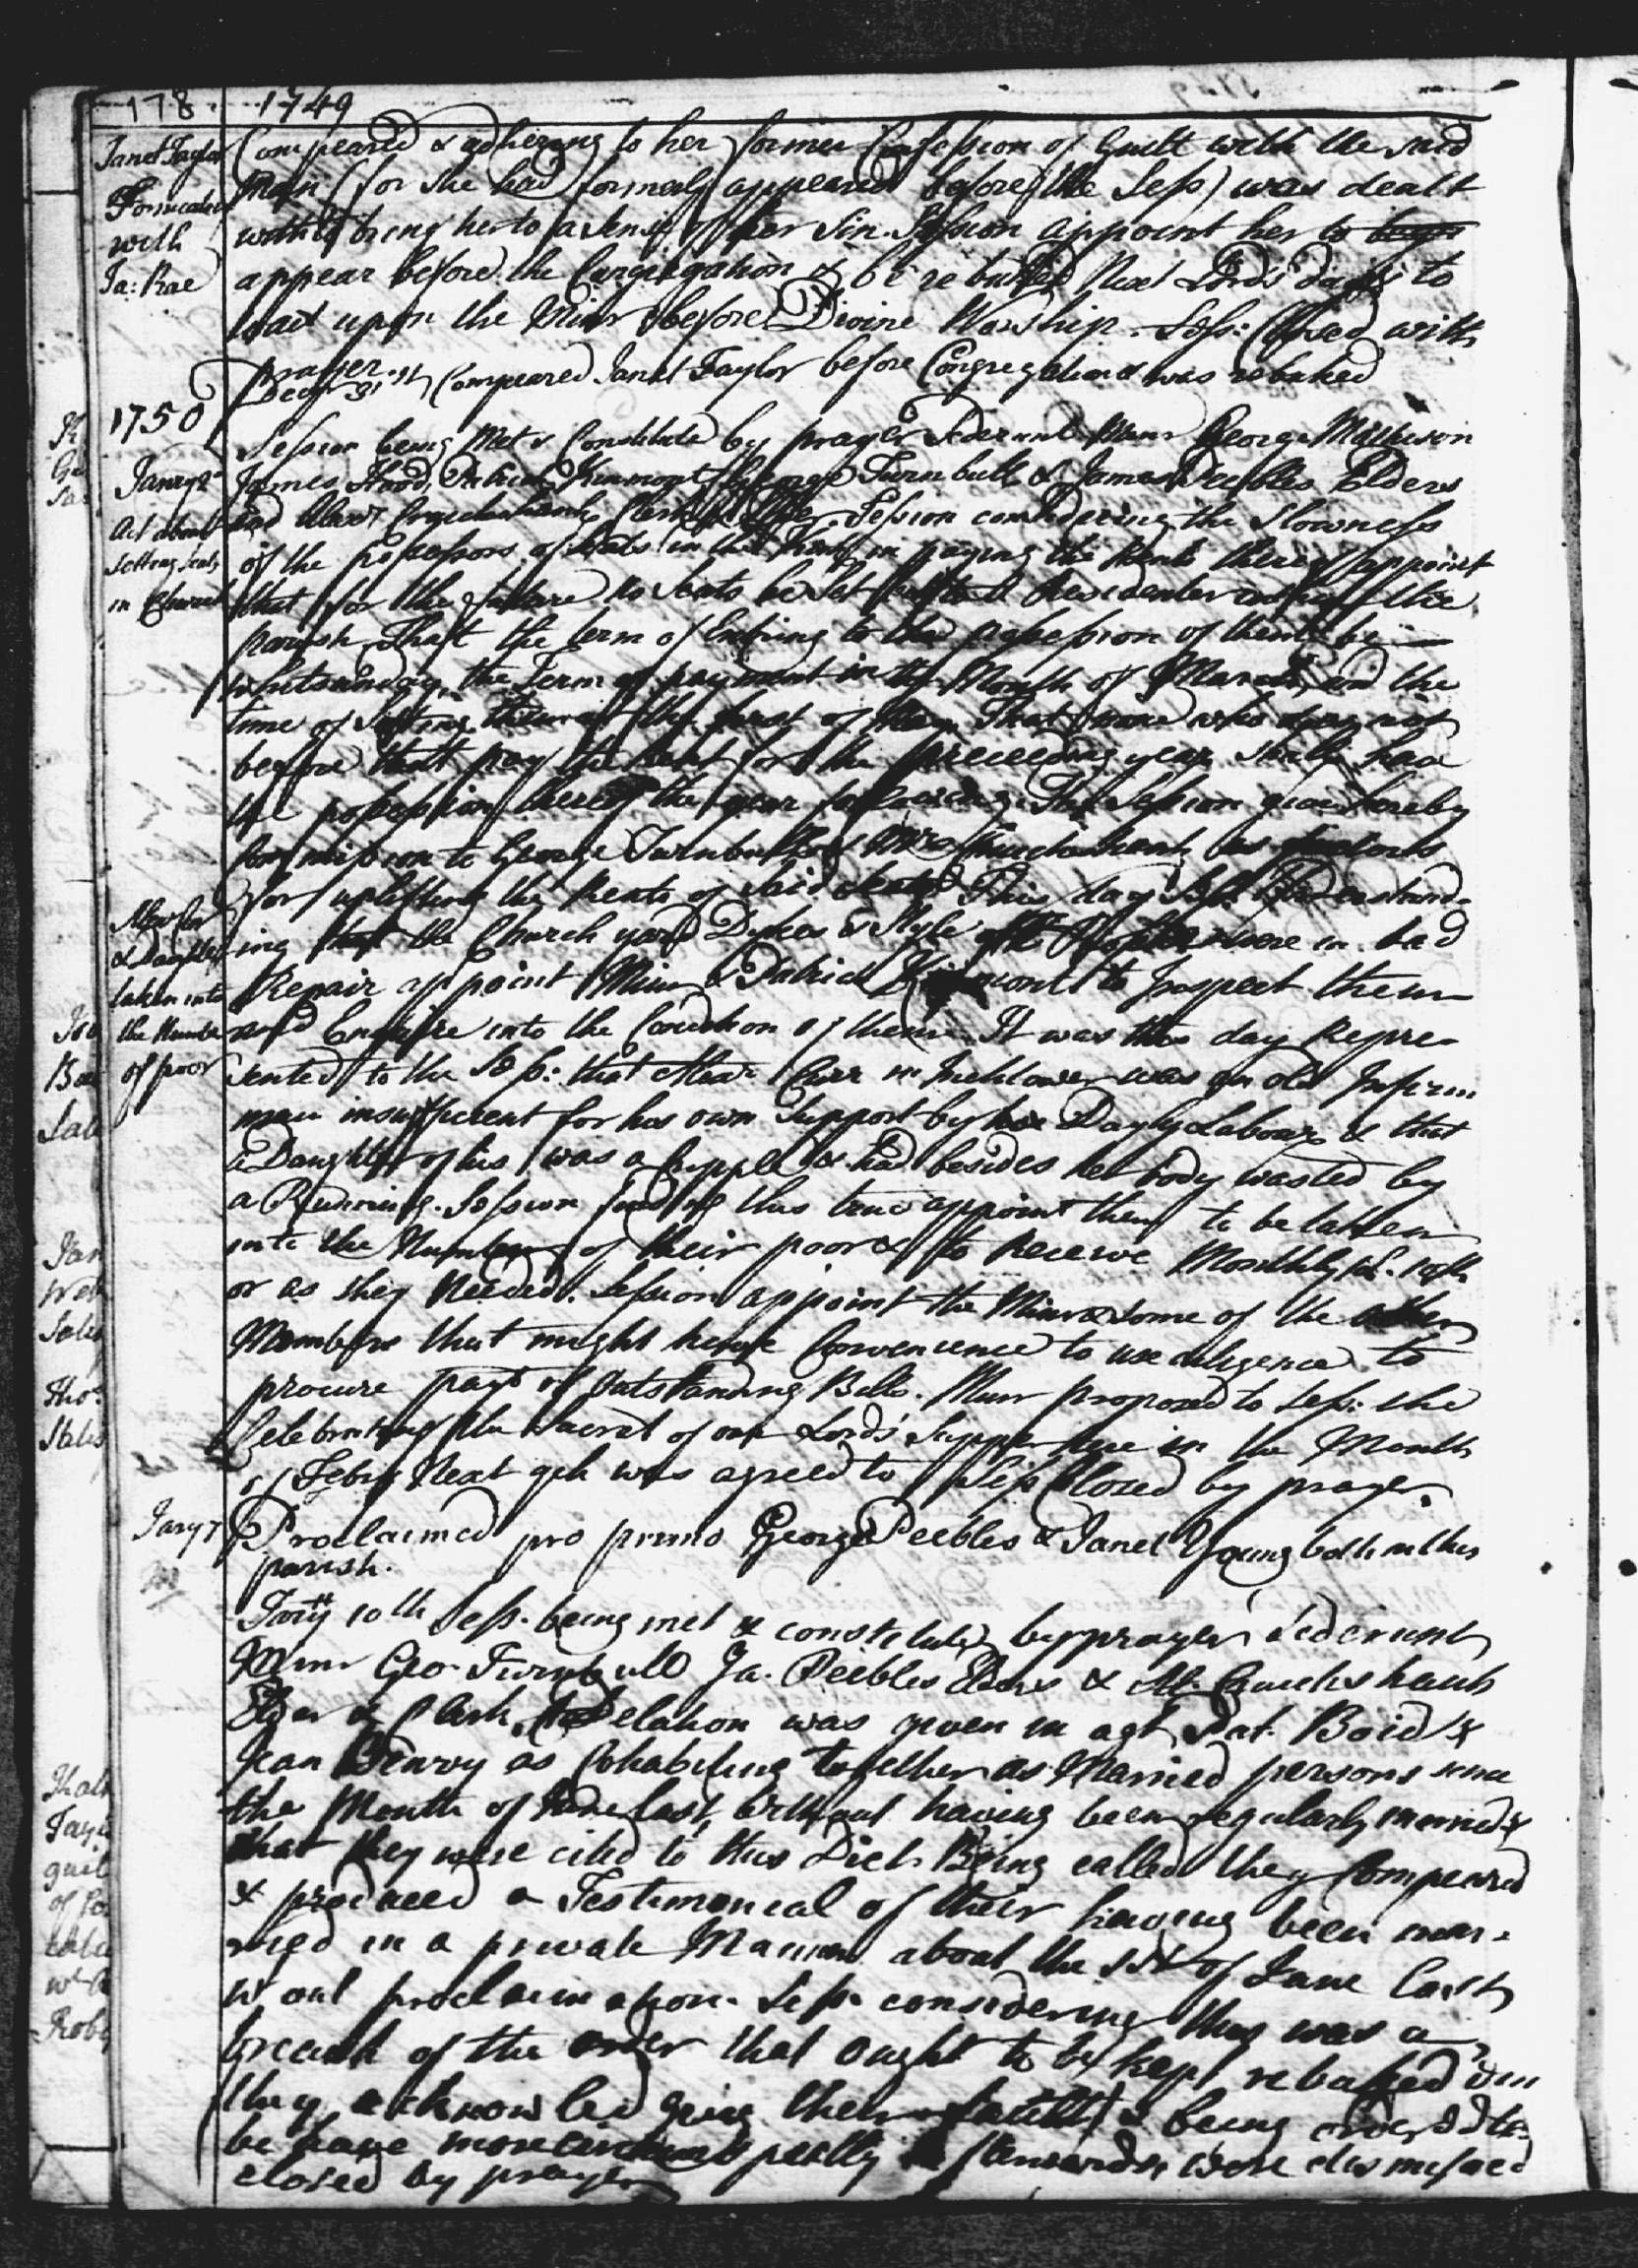 Evidence of marriage between Jean Benvy and Patrick Boyd in 1750